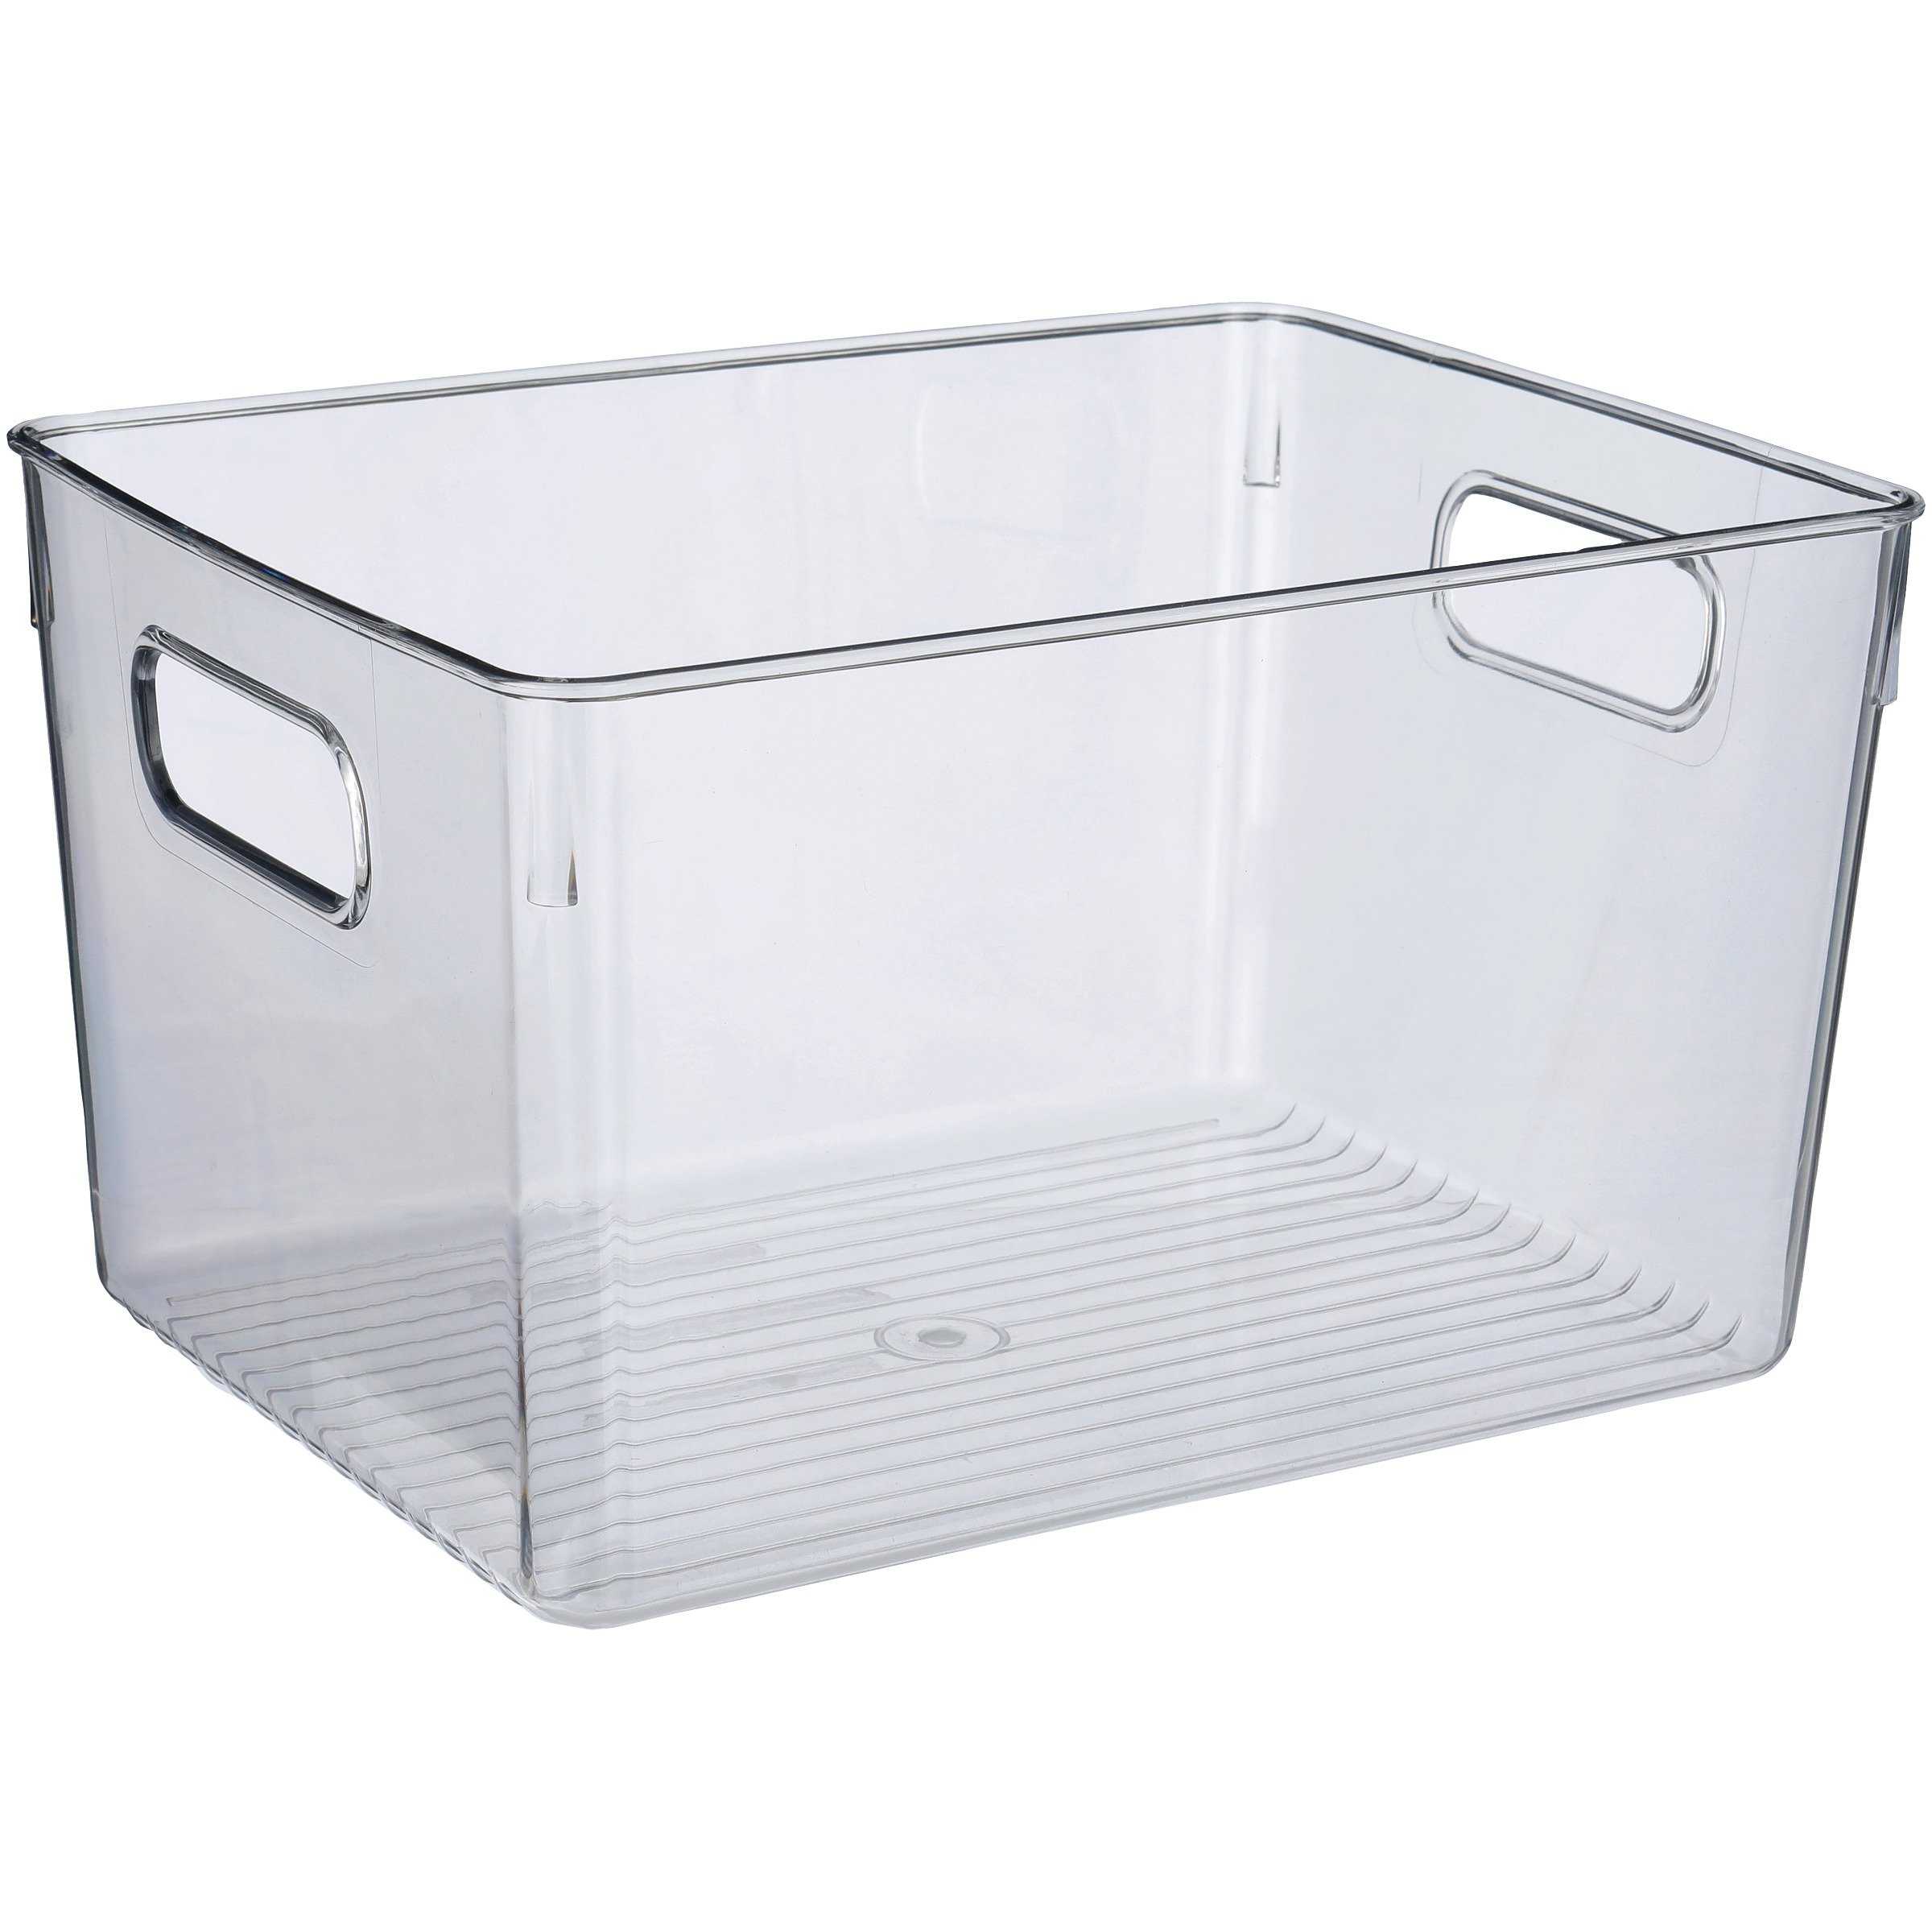 Destination Holiday Rectangle Food Storage Container with Lids